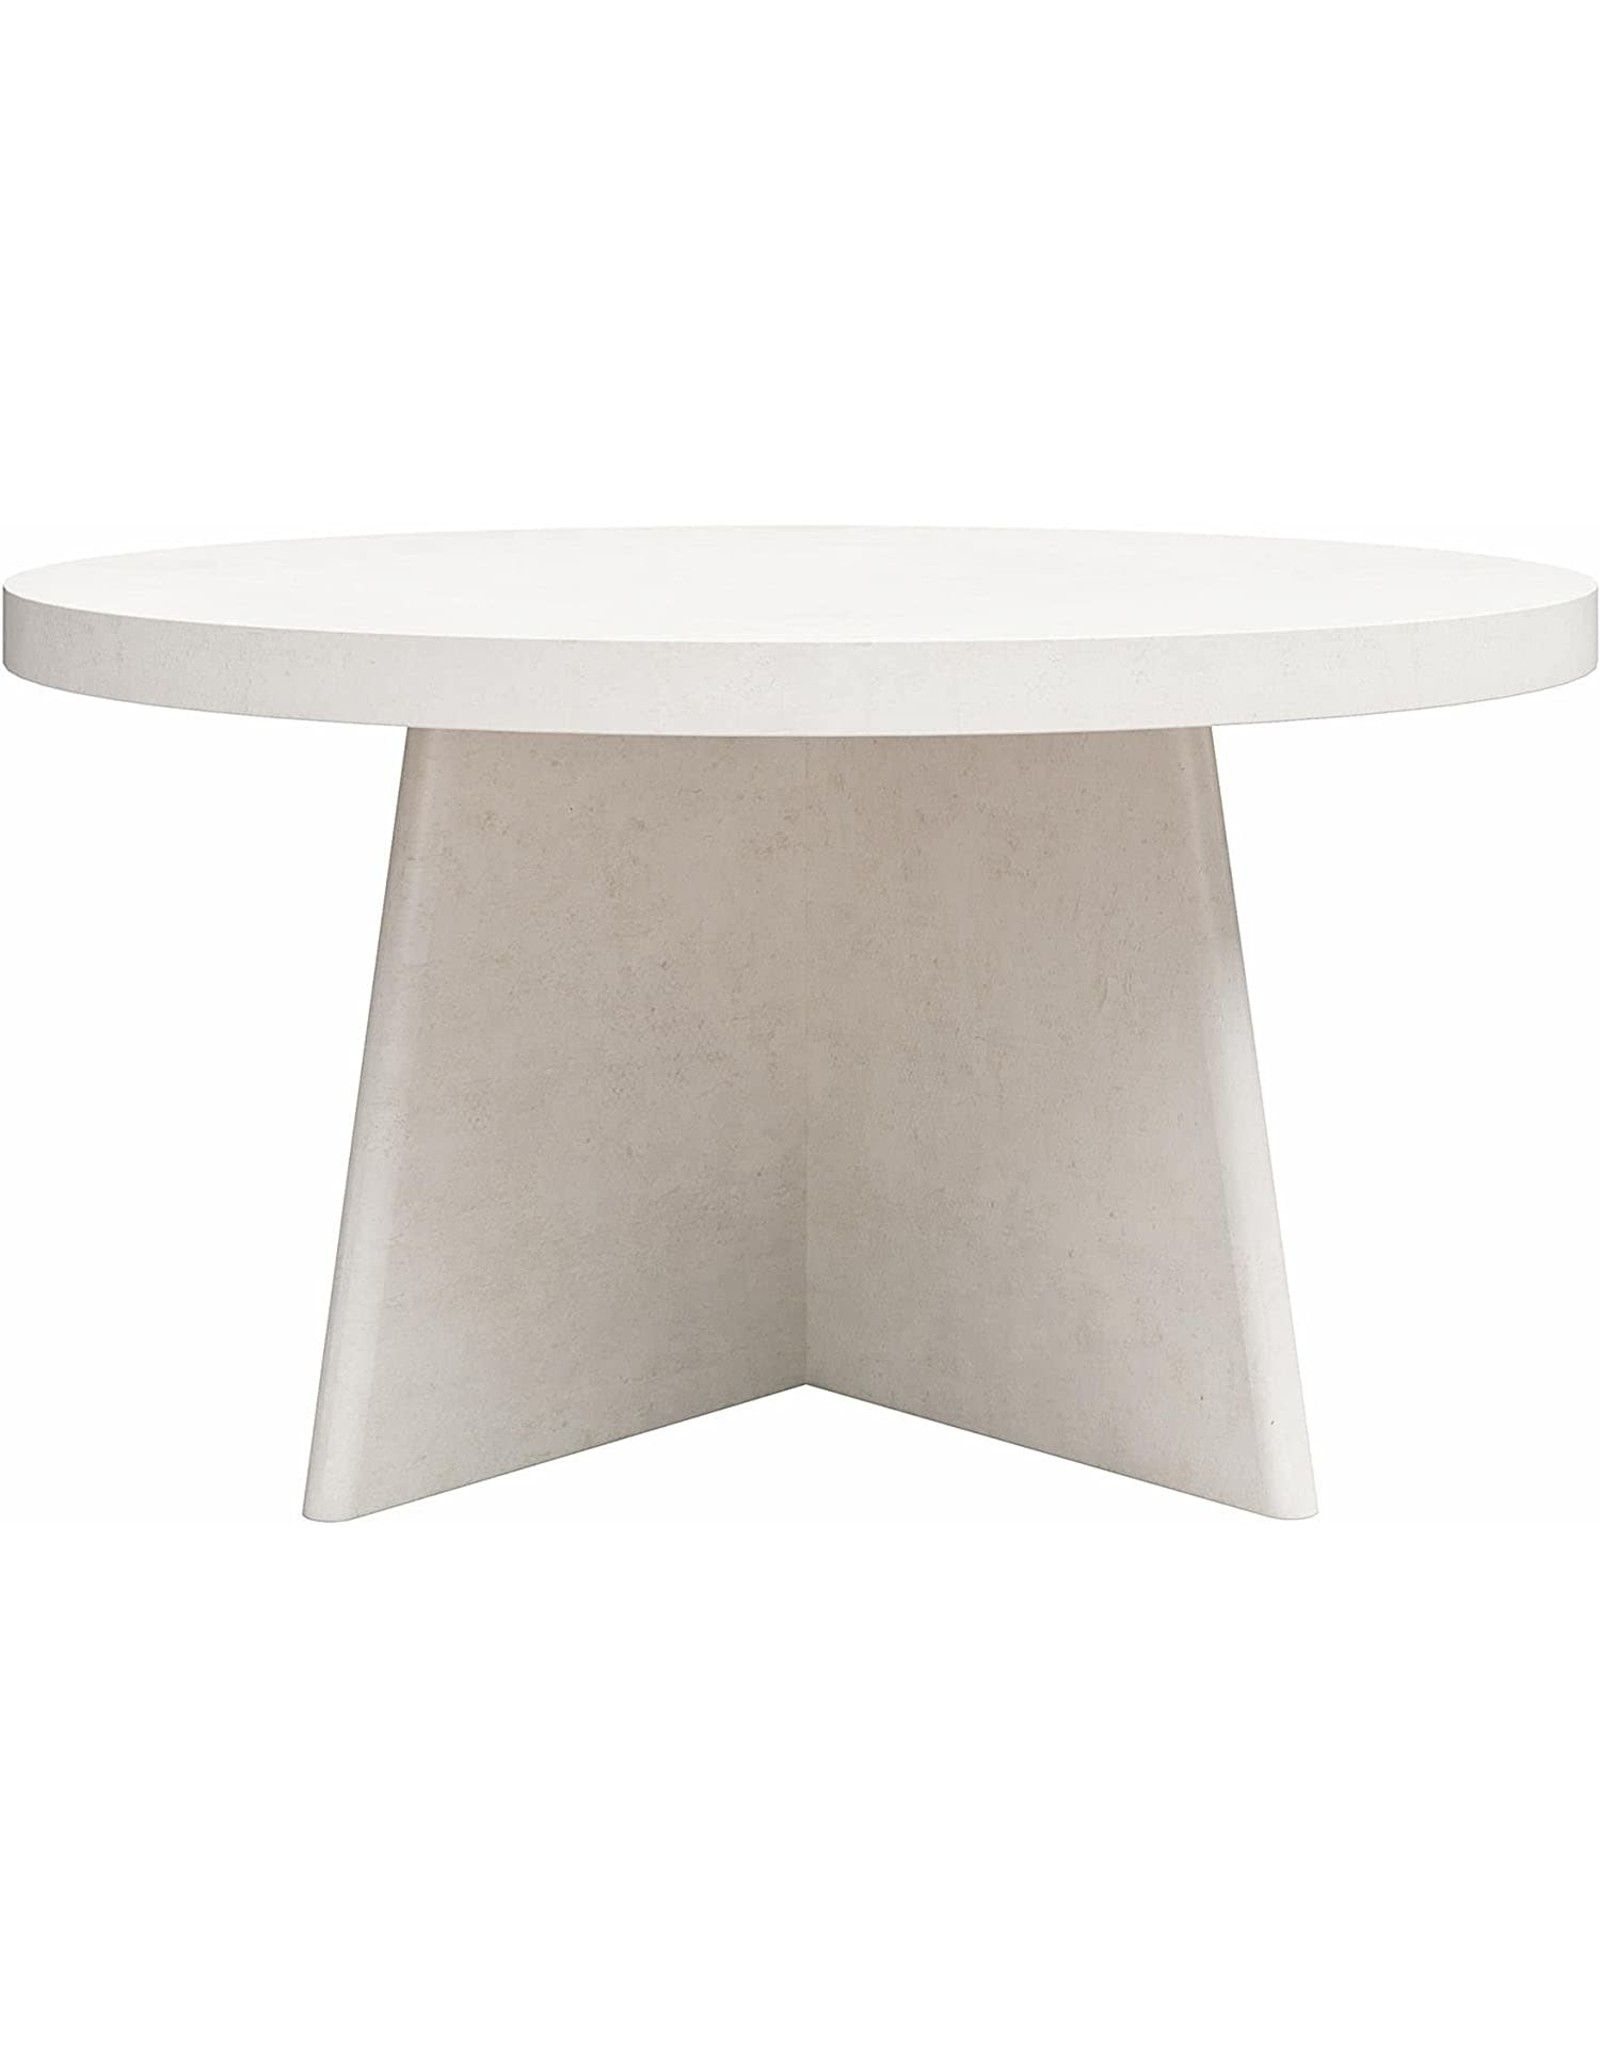 Ksoijor Liam Round Coffee Table, Plaster – Amazing Bargains Usa Within Liam Round Plaster Coffee Tables (Gallery 2 of 20)